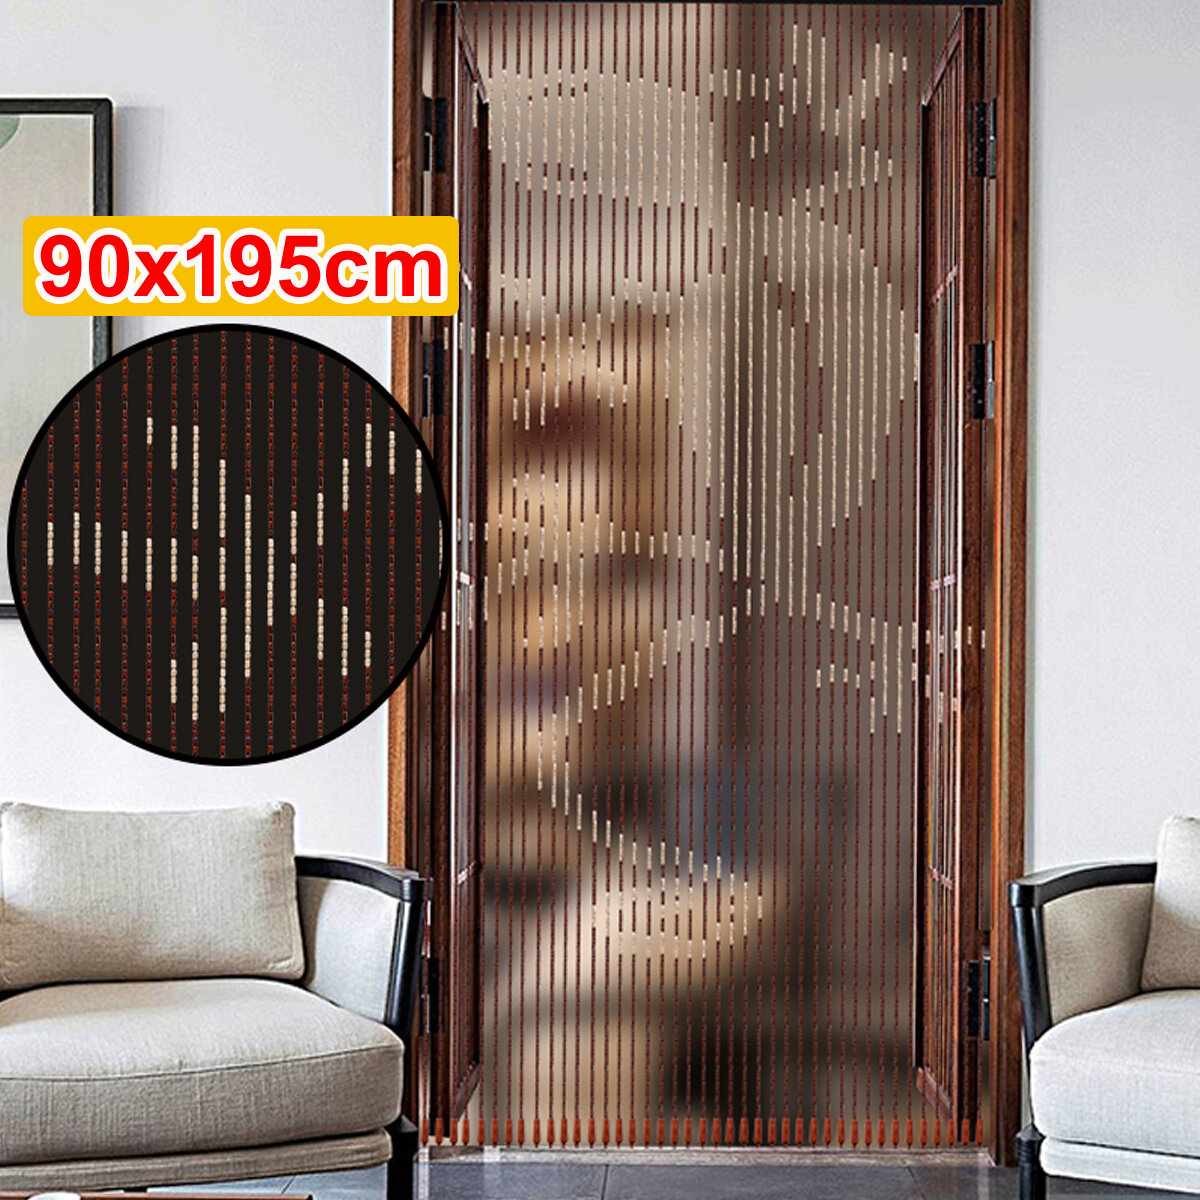 

90x195cm 41 Line Wooden Bead Curtain Non-toxic Fly Screen For Porch Bedroom Living Room Bathroom